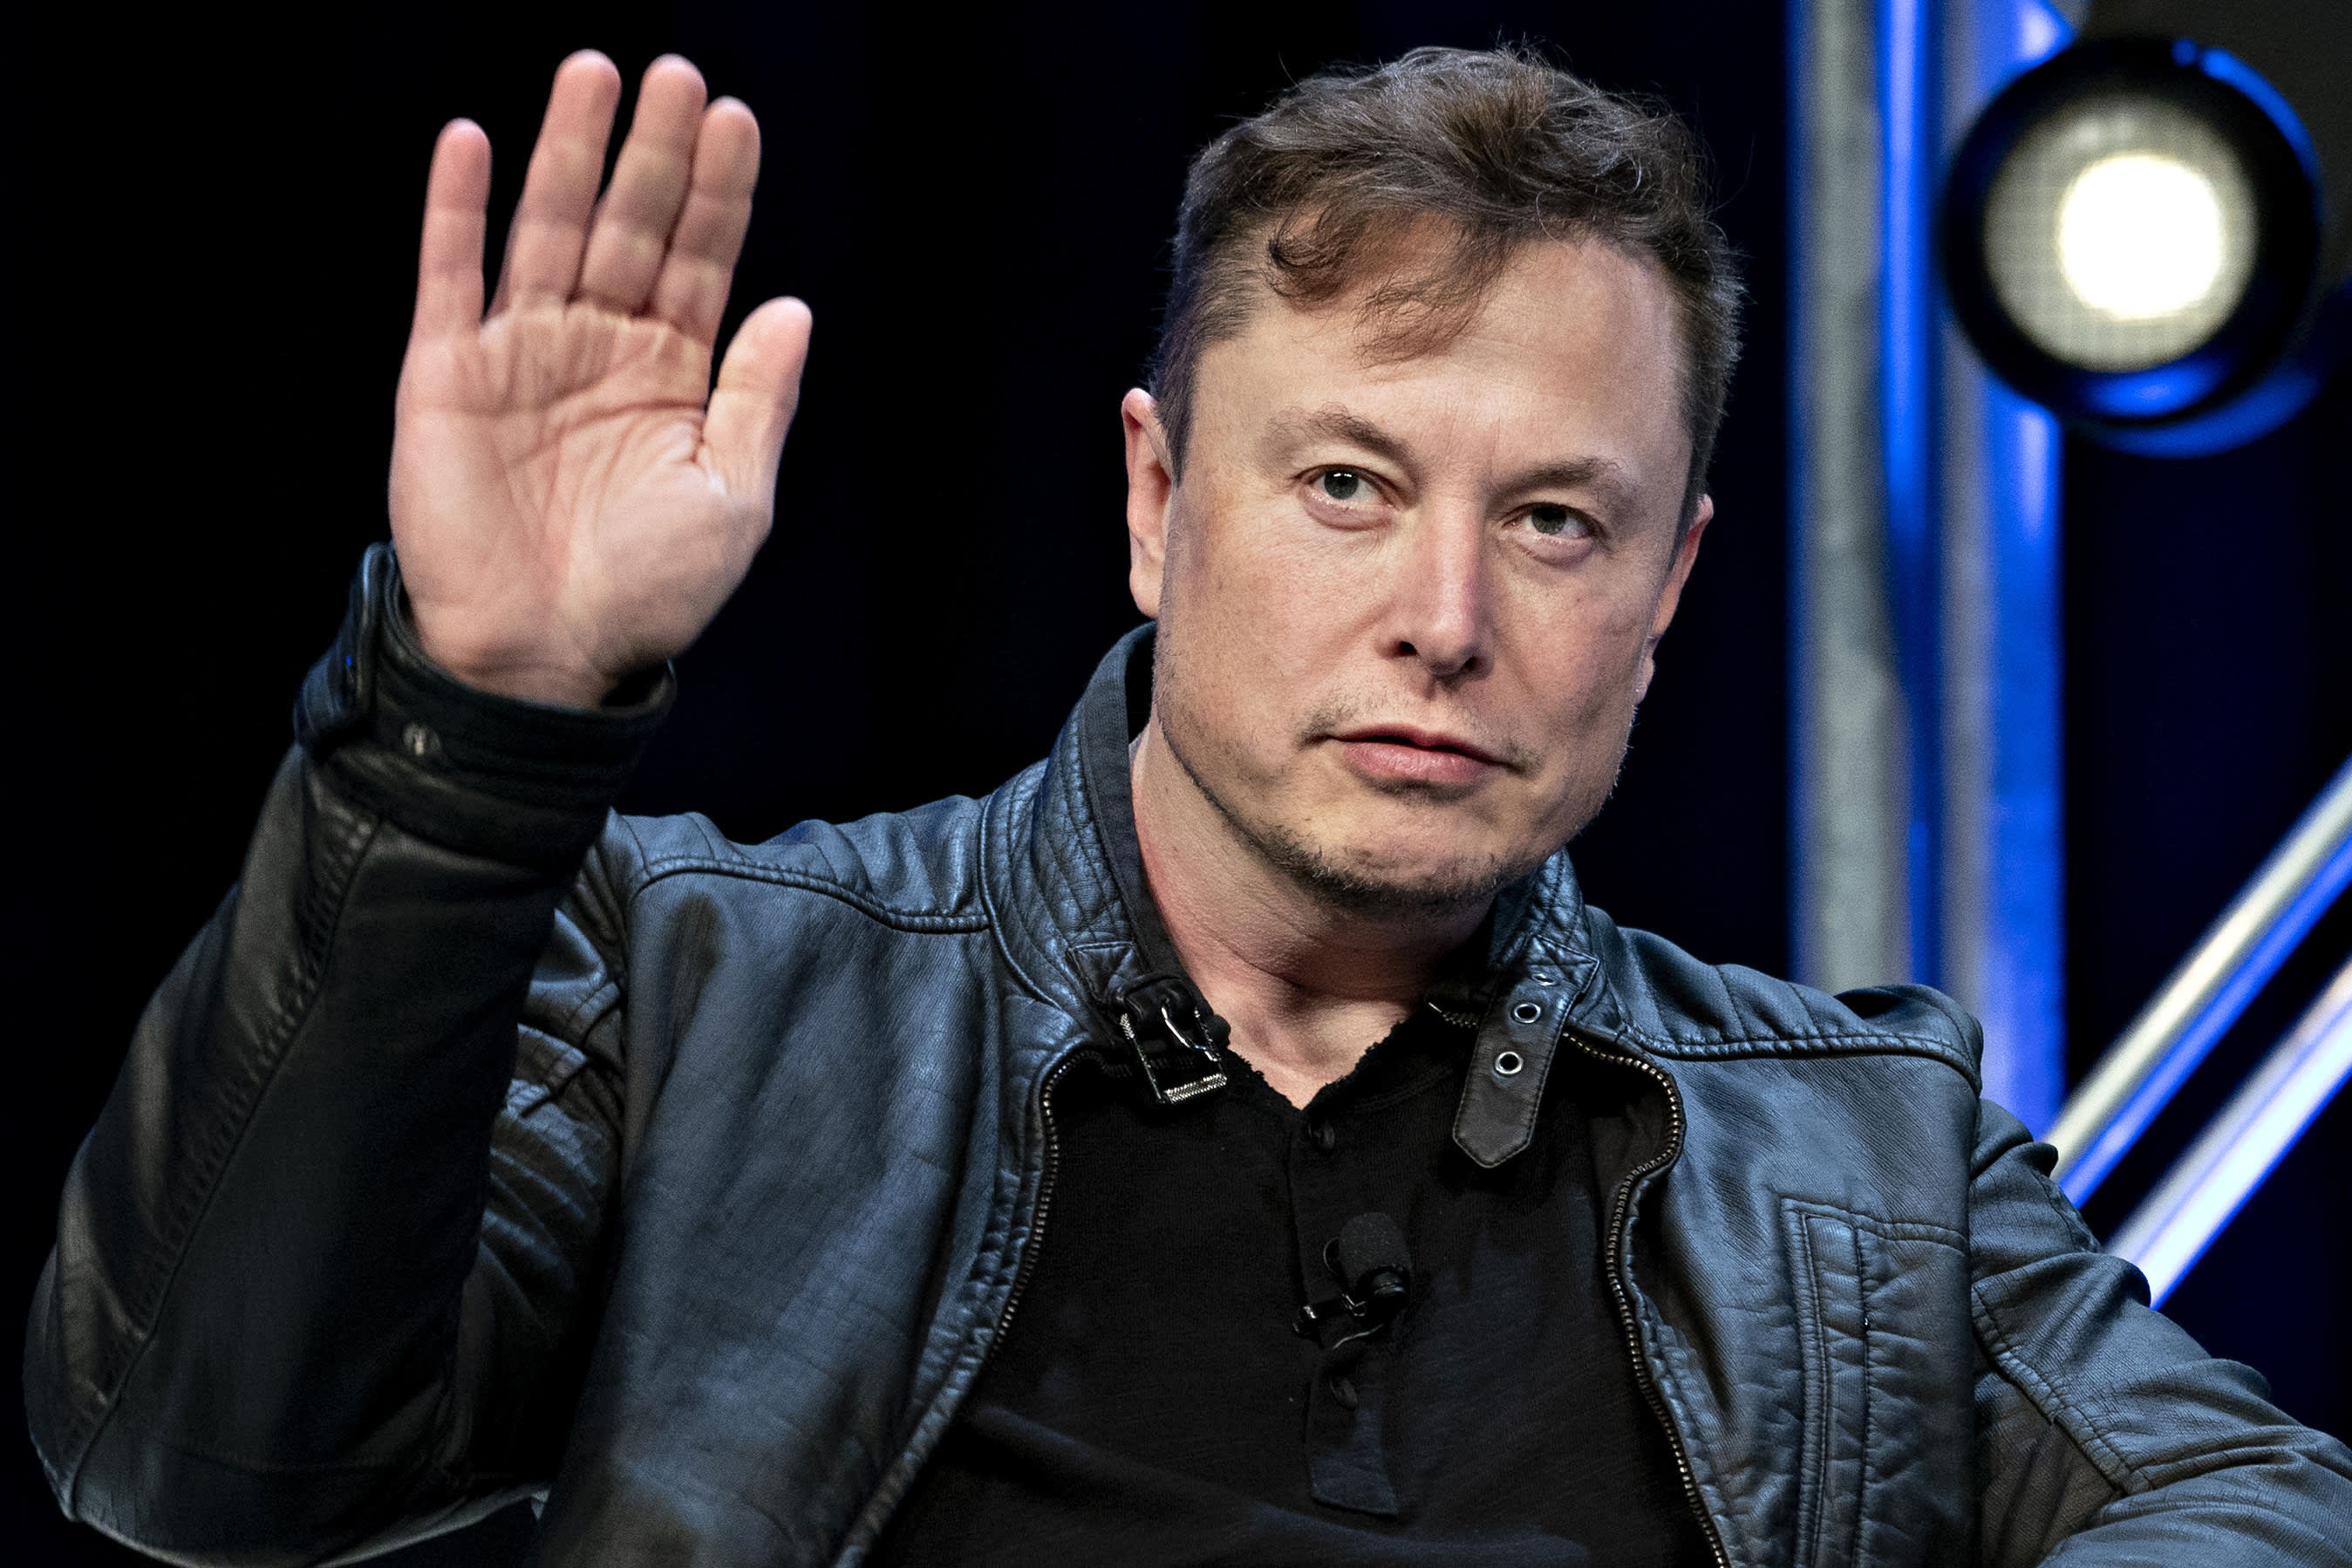 Tesla is acquiring $ 1.5 billion in bitcoin – what could happen next